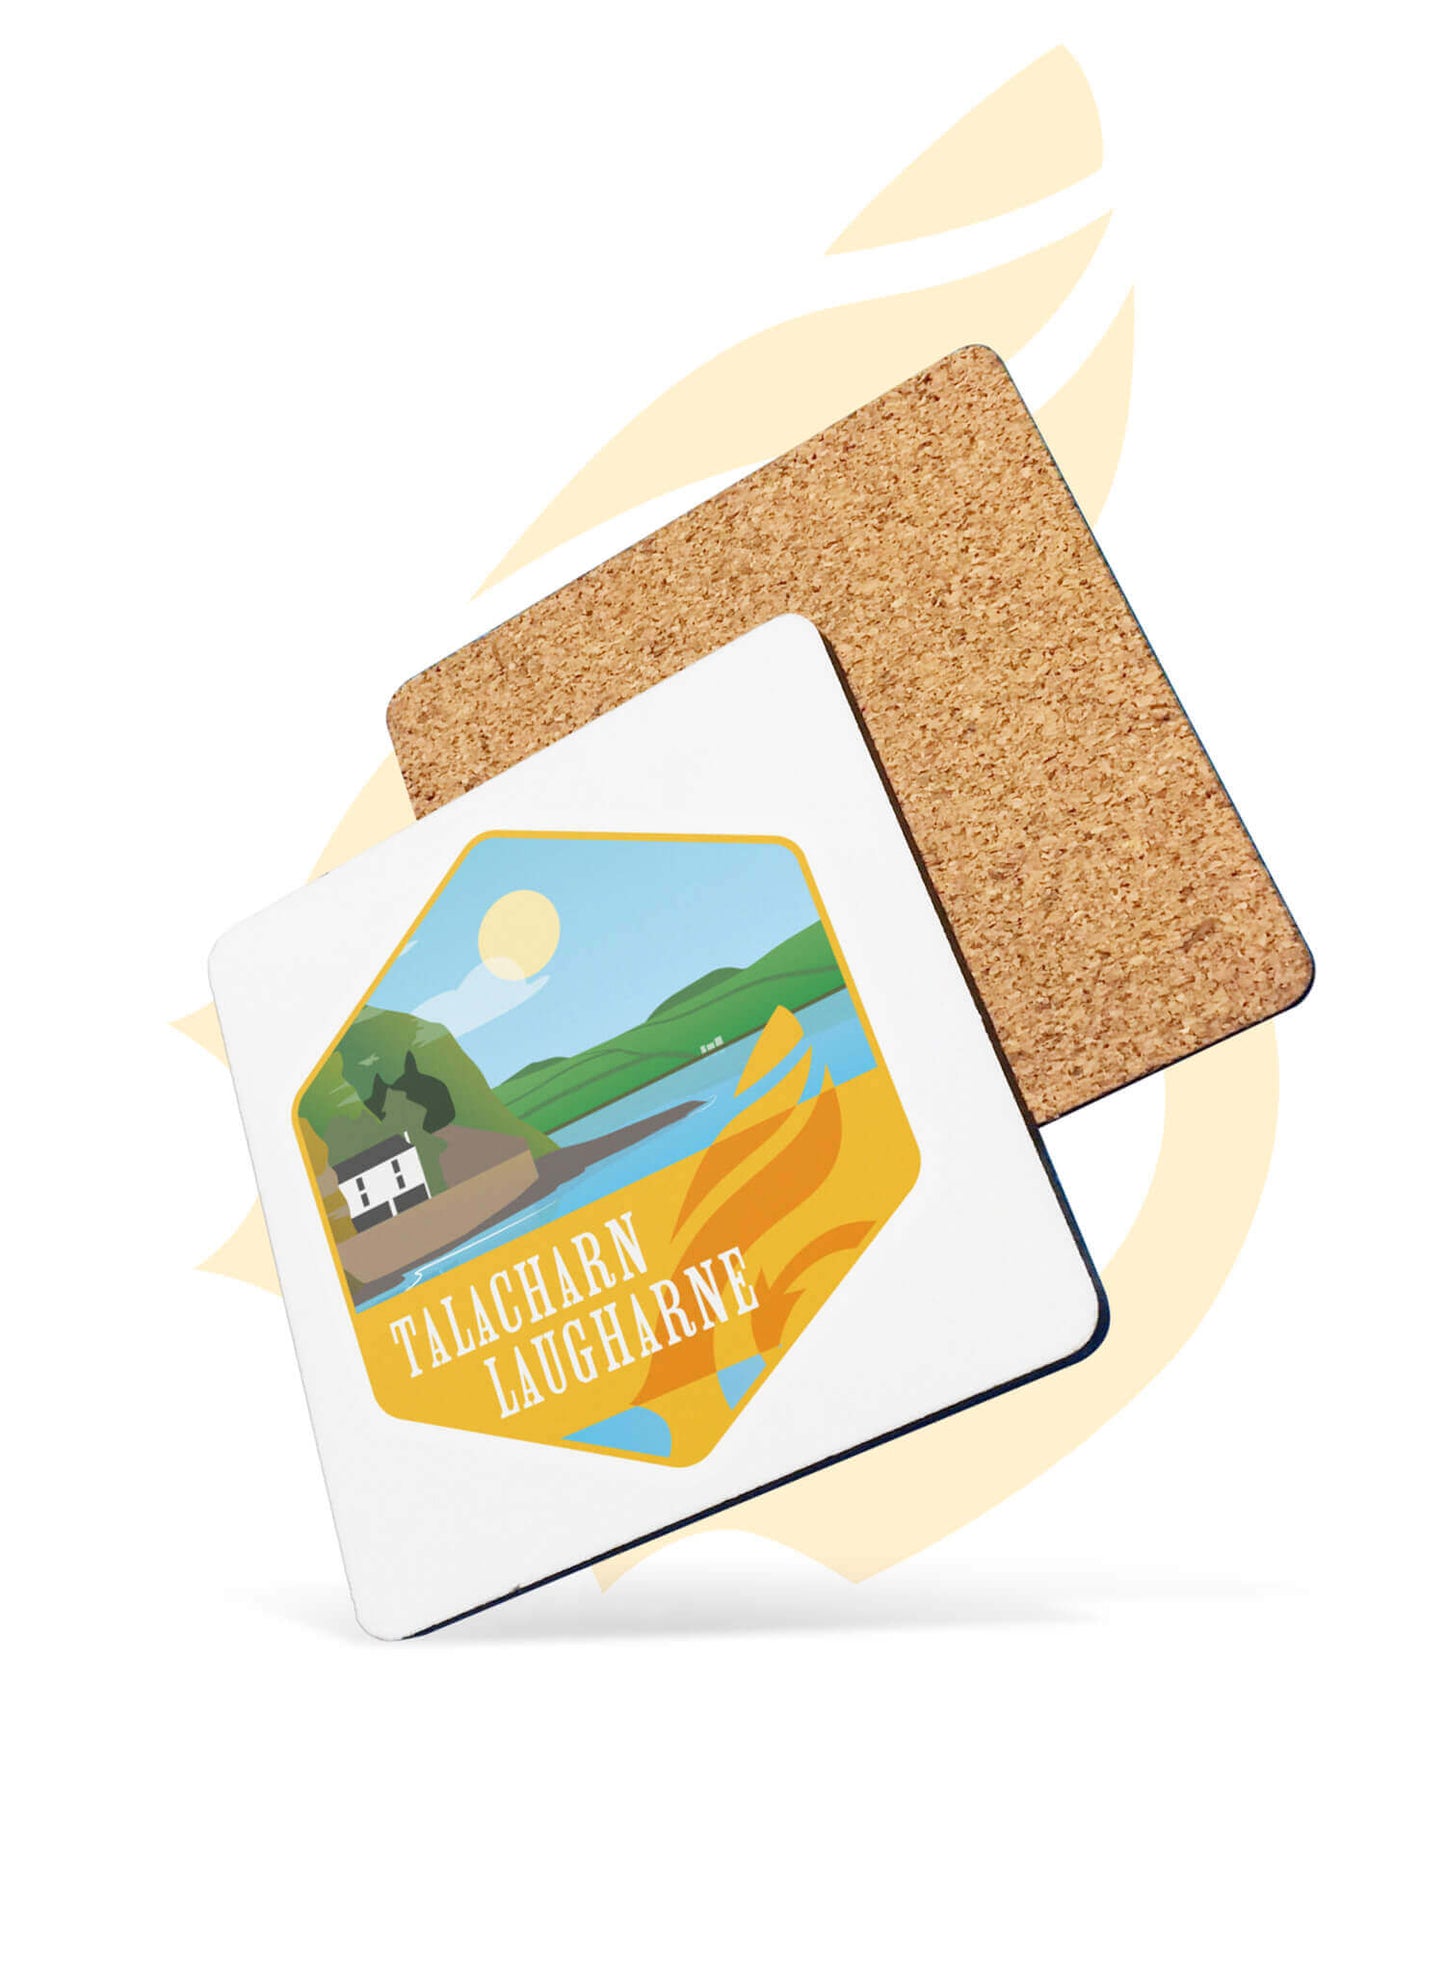 Wales Coast Path drinks coaster with Laugharne design.